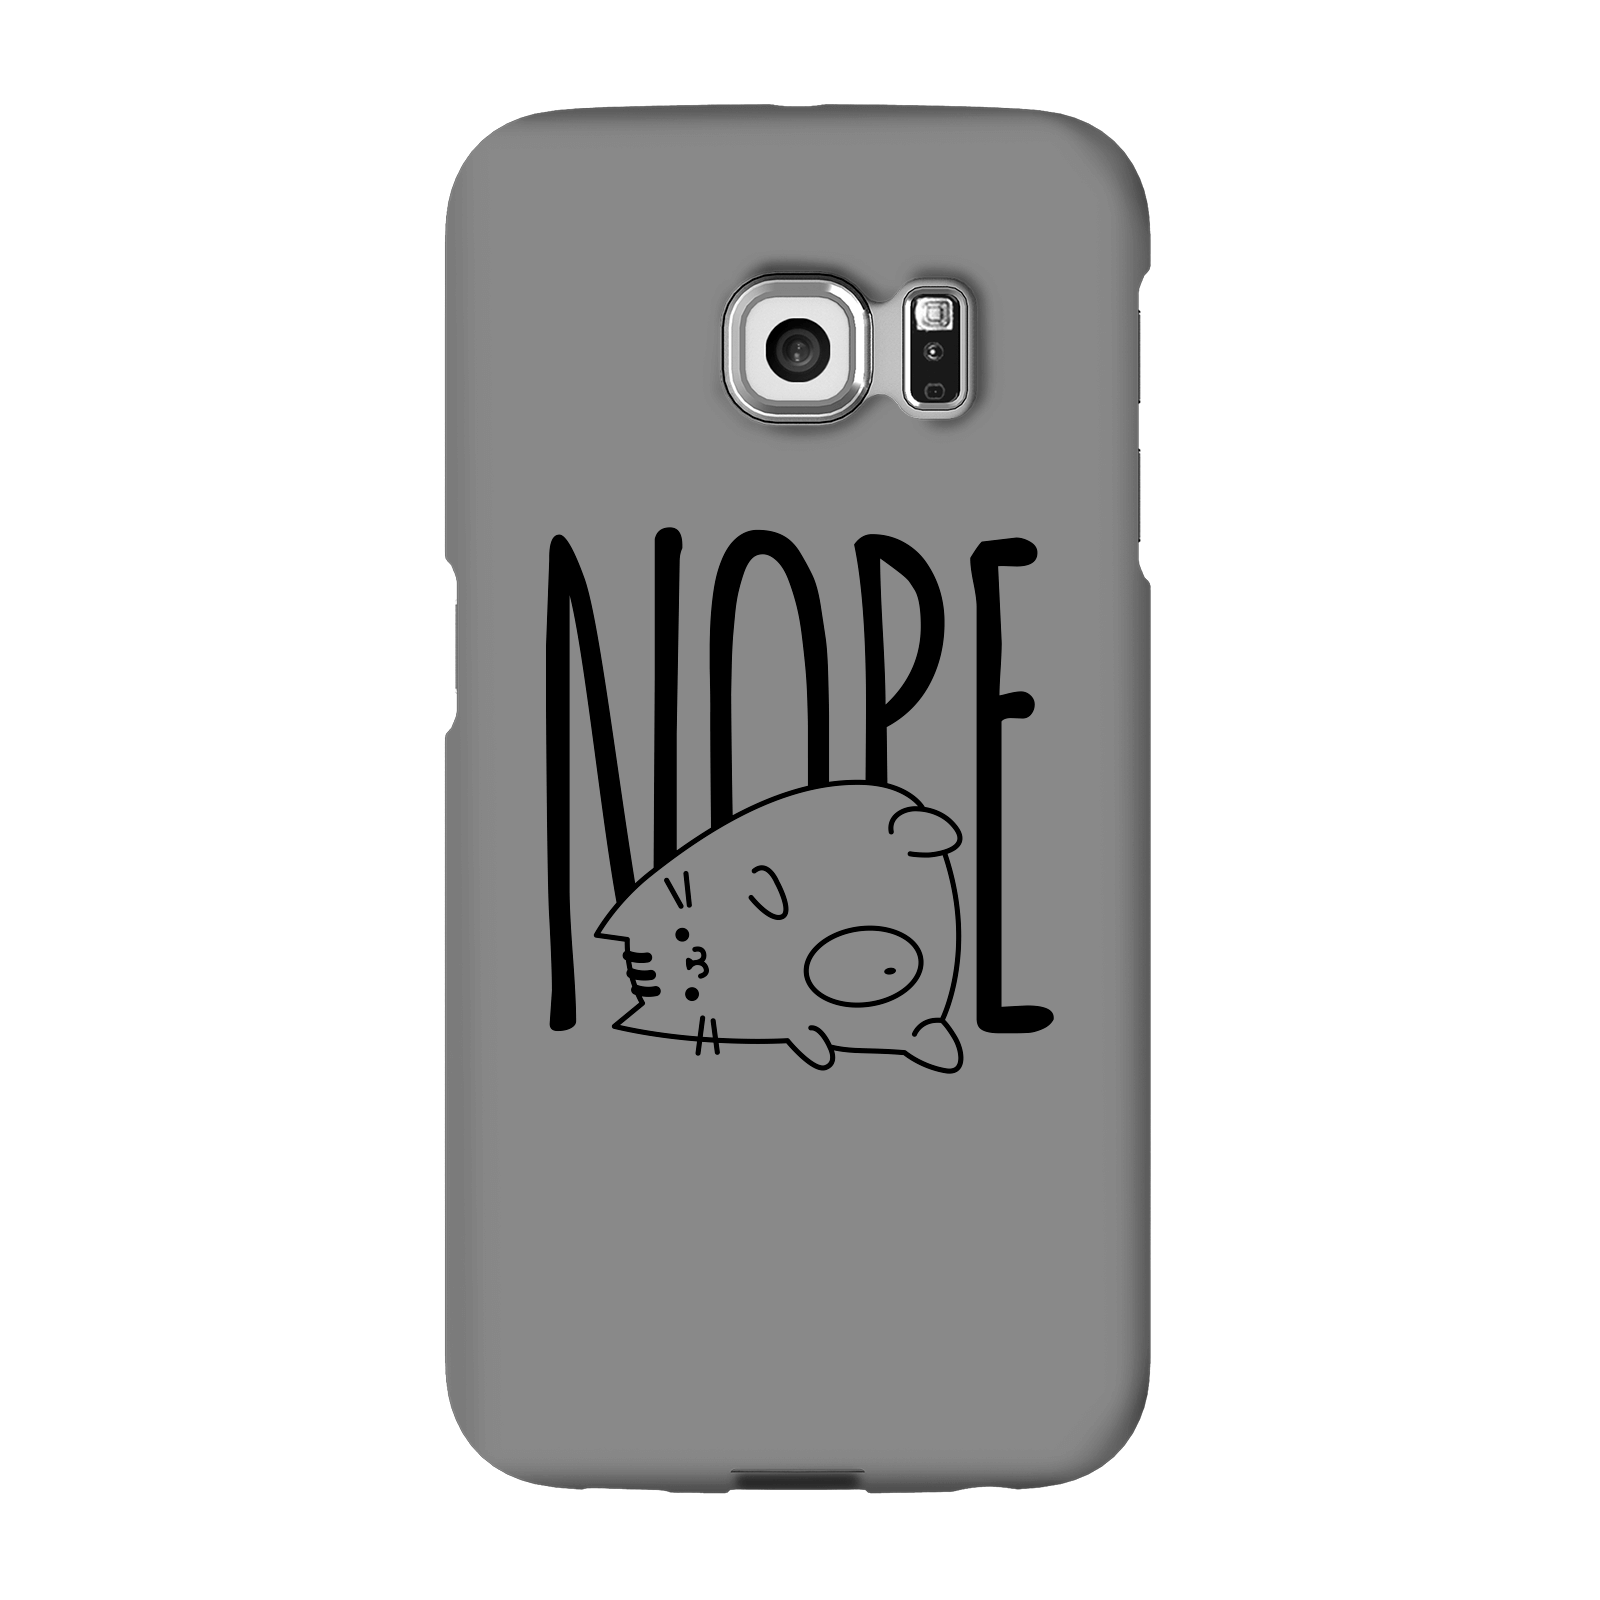 Nope Phone Case for iPhone and Android - Samsung S6 Edge - Snap Case - Matte